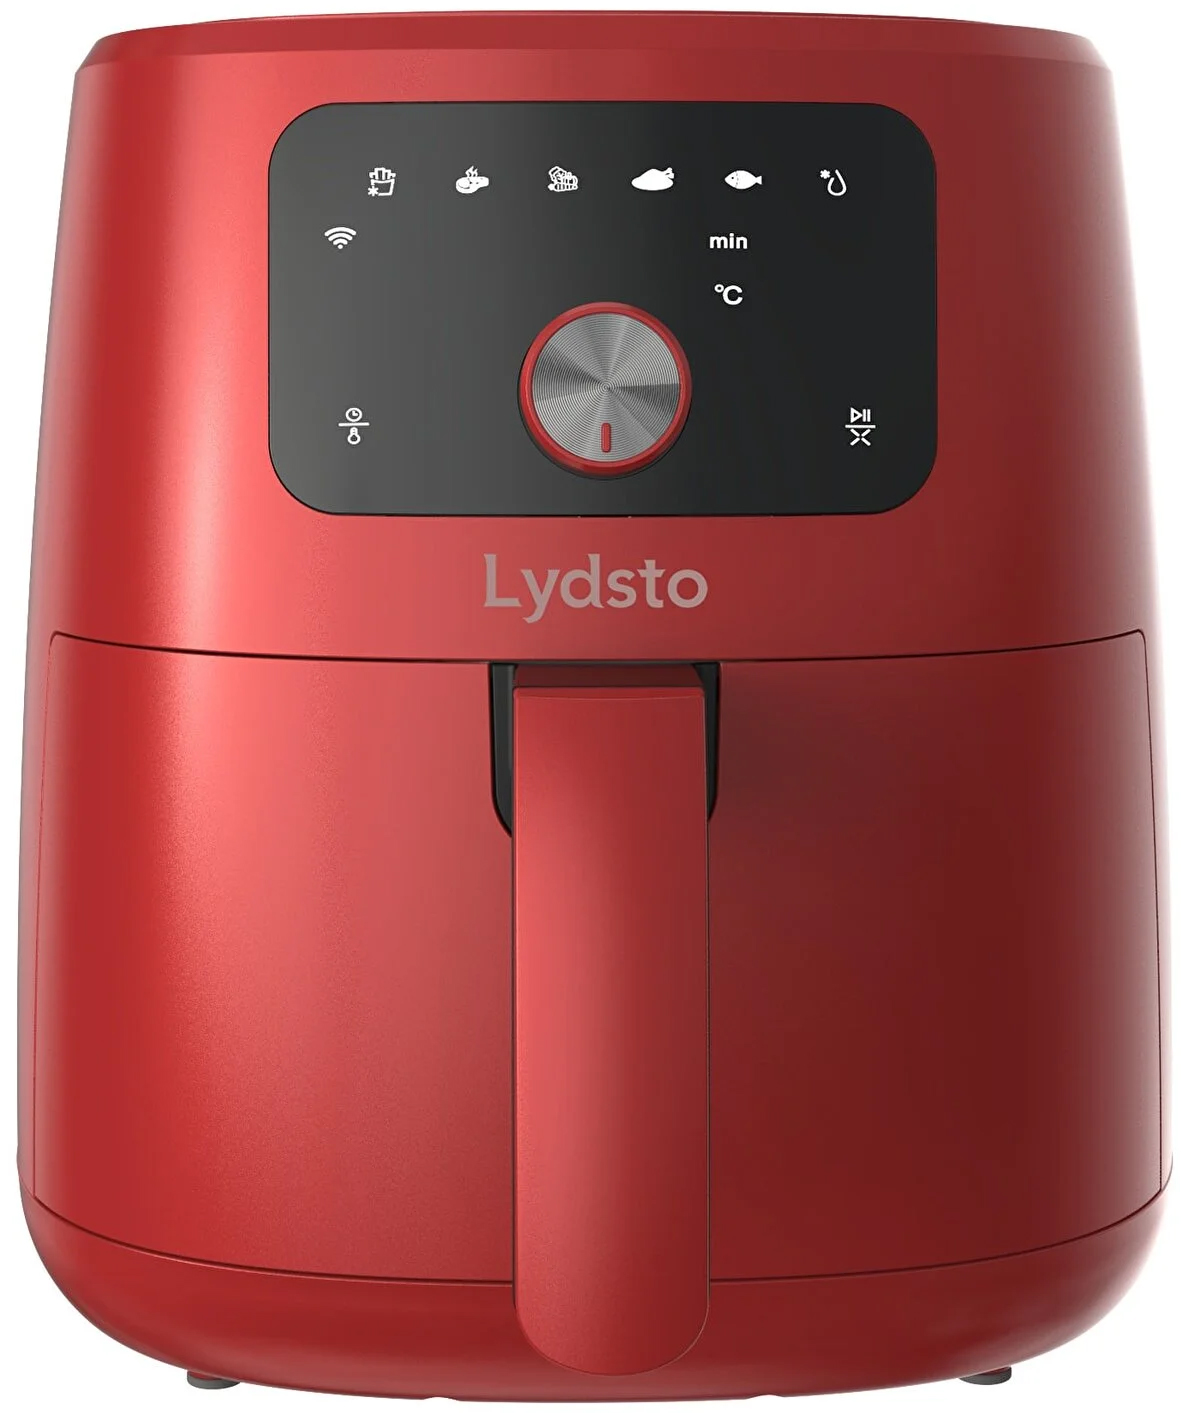 Аэрогриль Xiaomi Lydsto Smart Air Fryer 5L Red (XD-ZNKQZG03) smart electric air fryers 5l automatic household 360°baking led touchscreen air fryer without oil free smokeless eu us plug